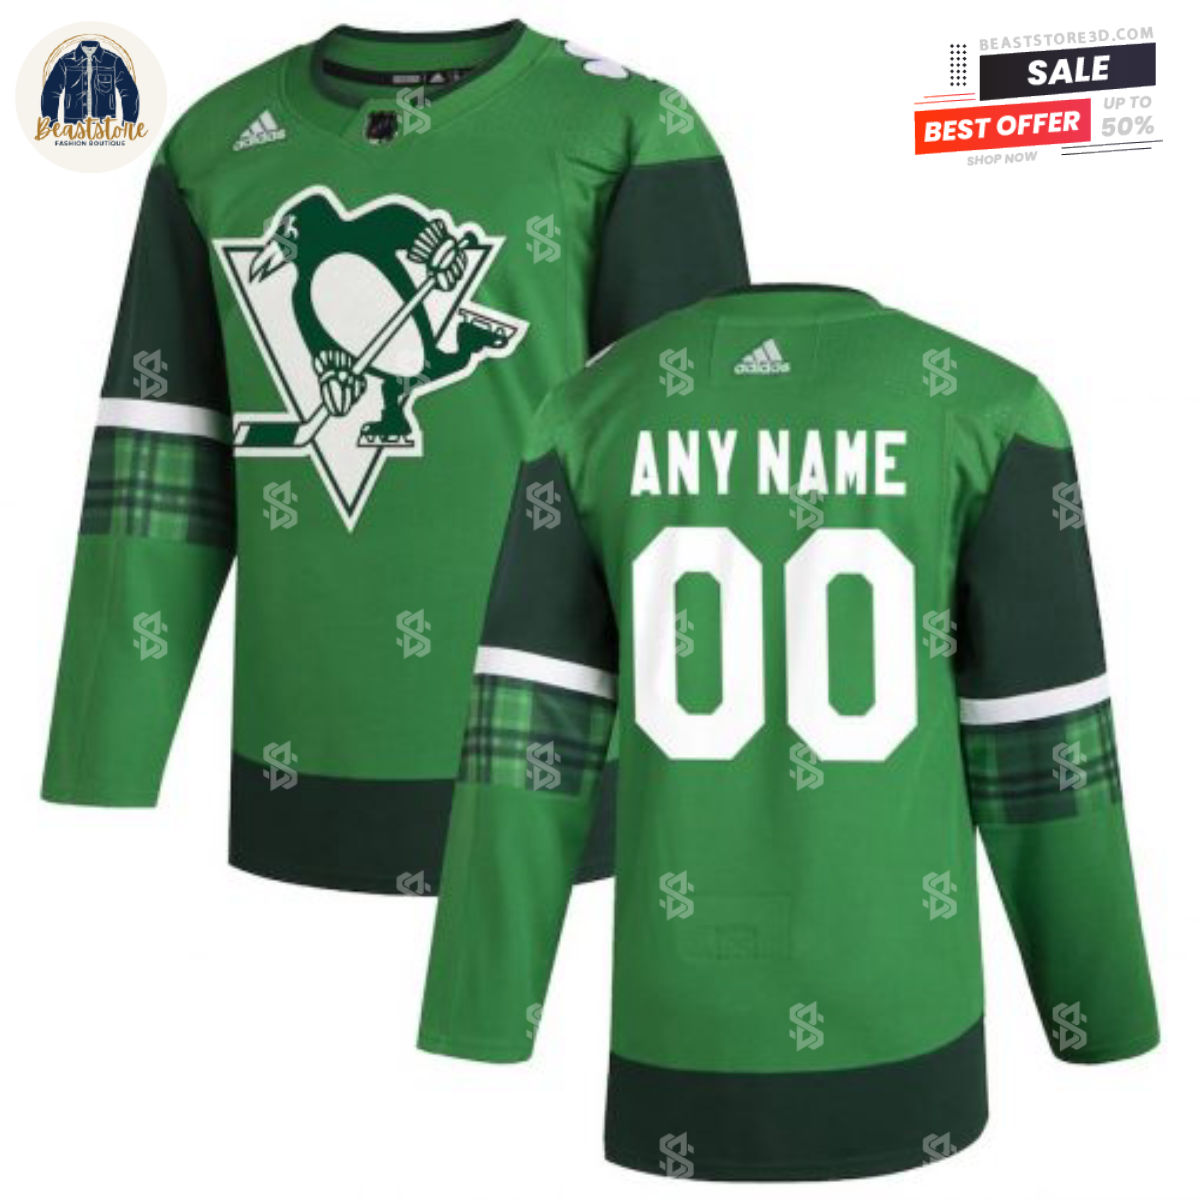 Pittsburgh Penguins Green St. Patrick Day Personalized NHL Hockey Jerseys